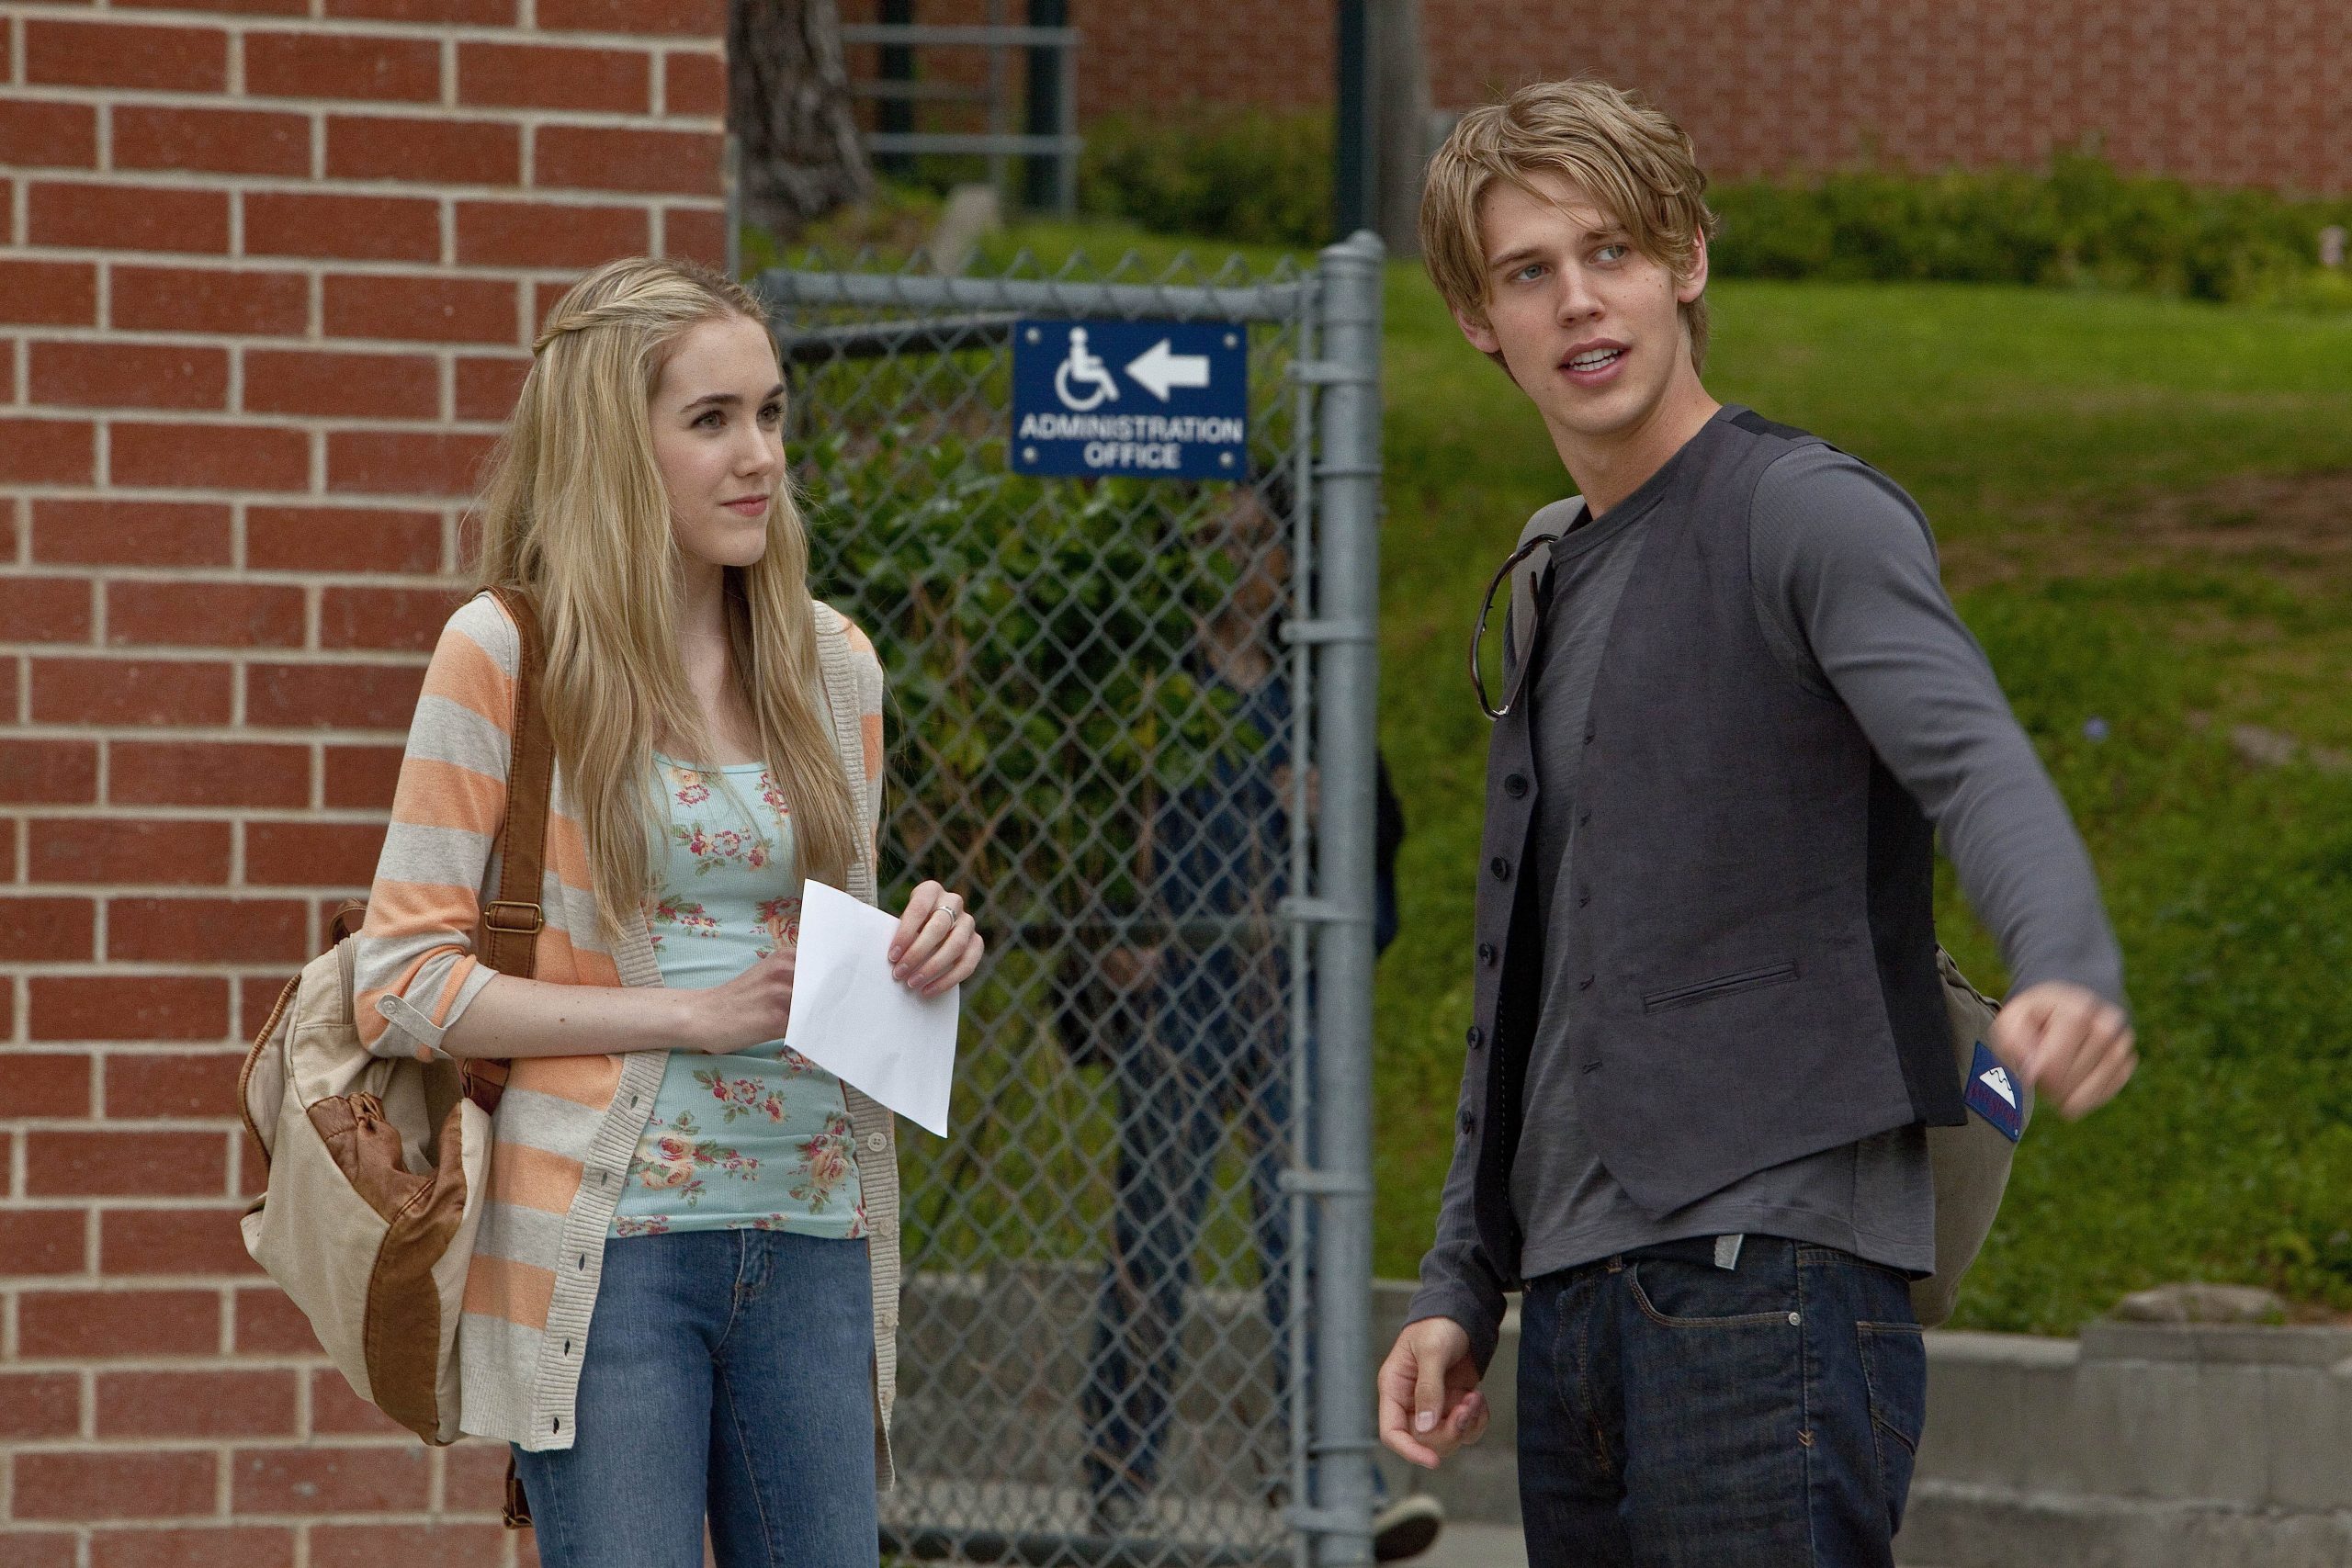 The Definitive Ranking of 14 Austin Butler Movies and TV Shows